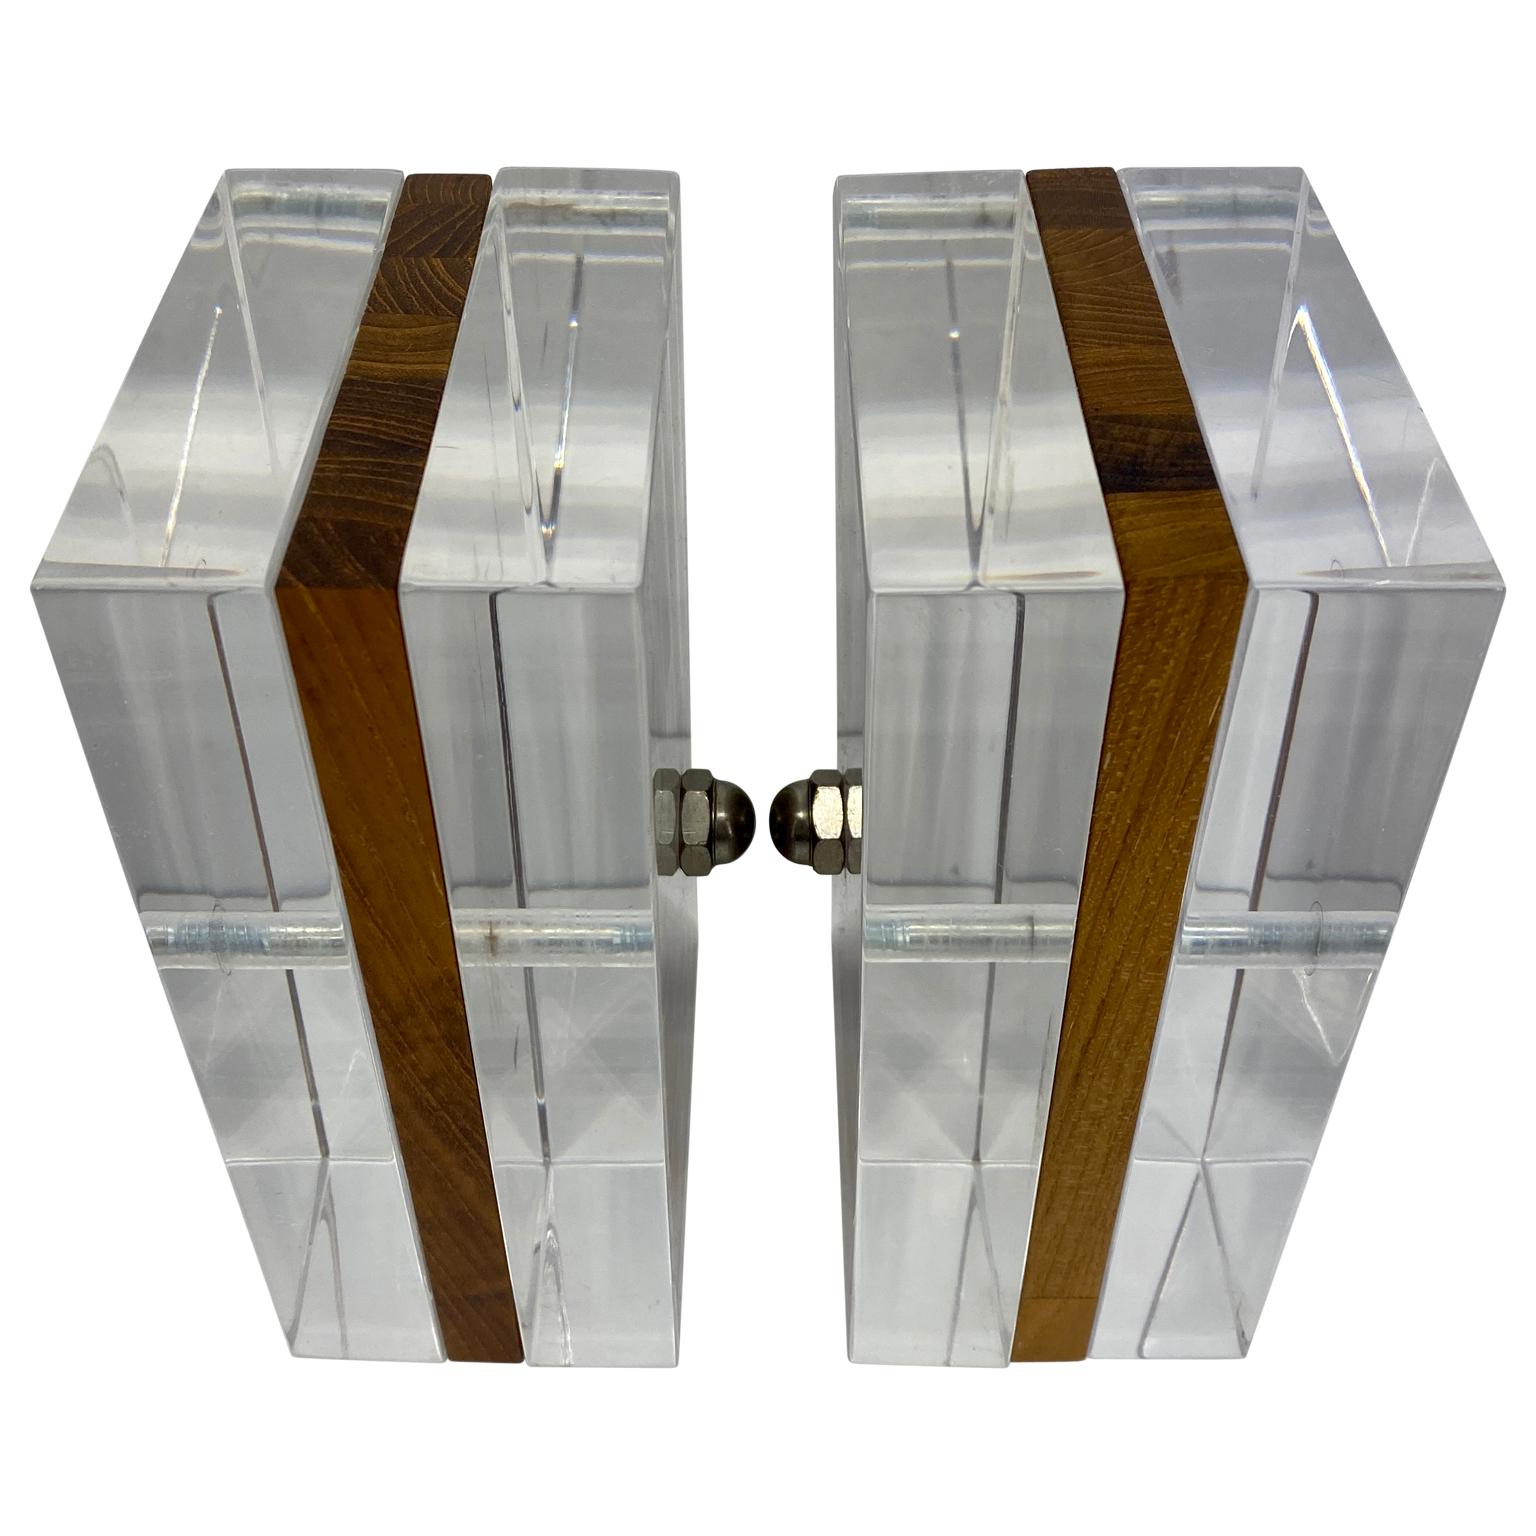 Just look at these unusual and striking pair of wood and lucite bookends. They are tall and handsome and can hold books or records. The detailing of wood being held together with a chrome rod make them especially unique. The polish of the lucite is